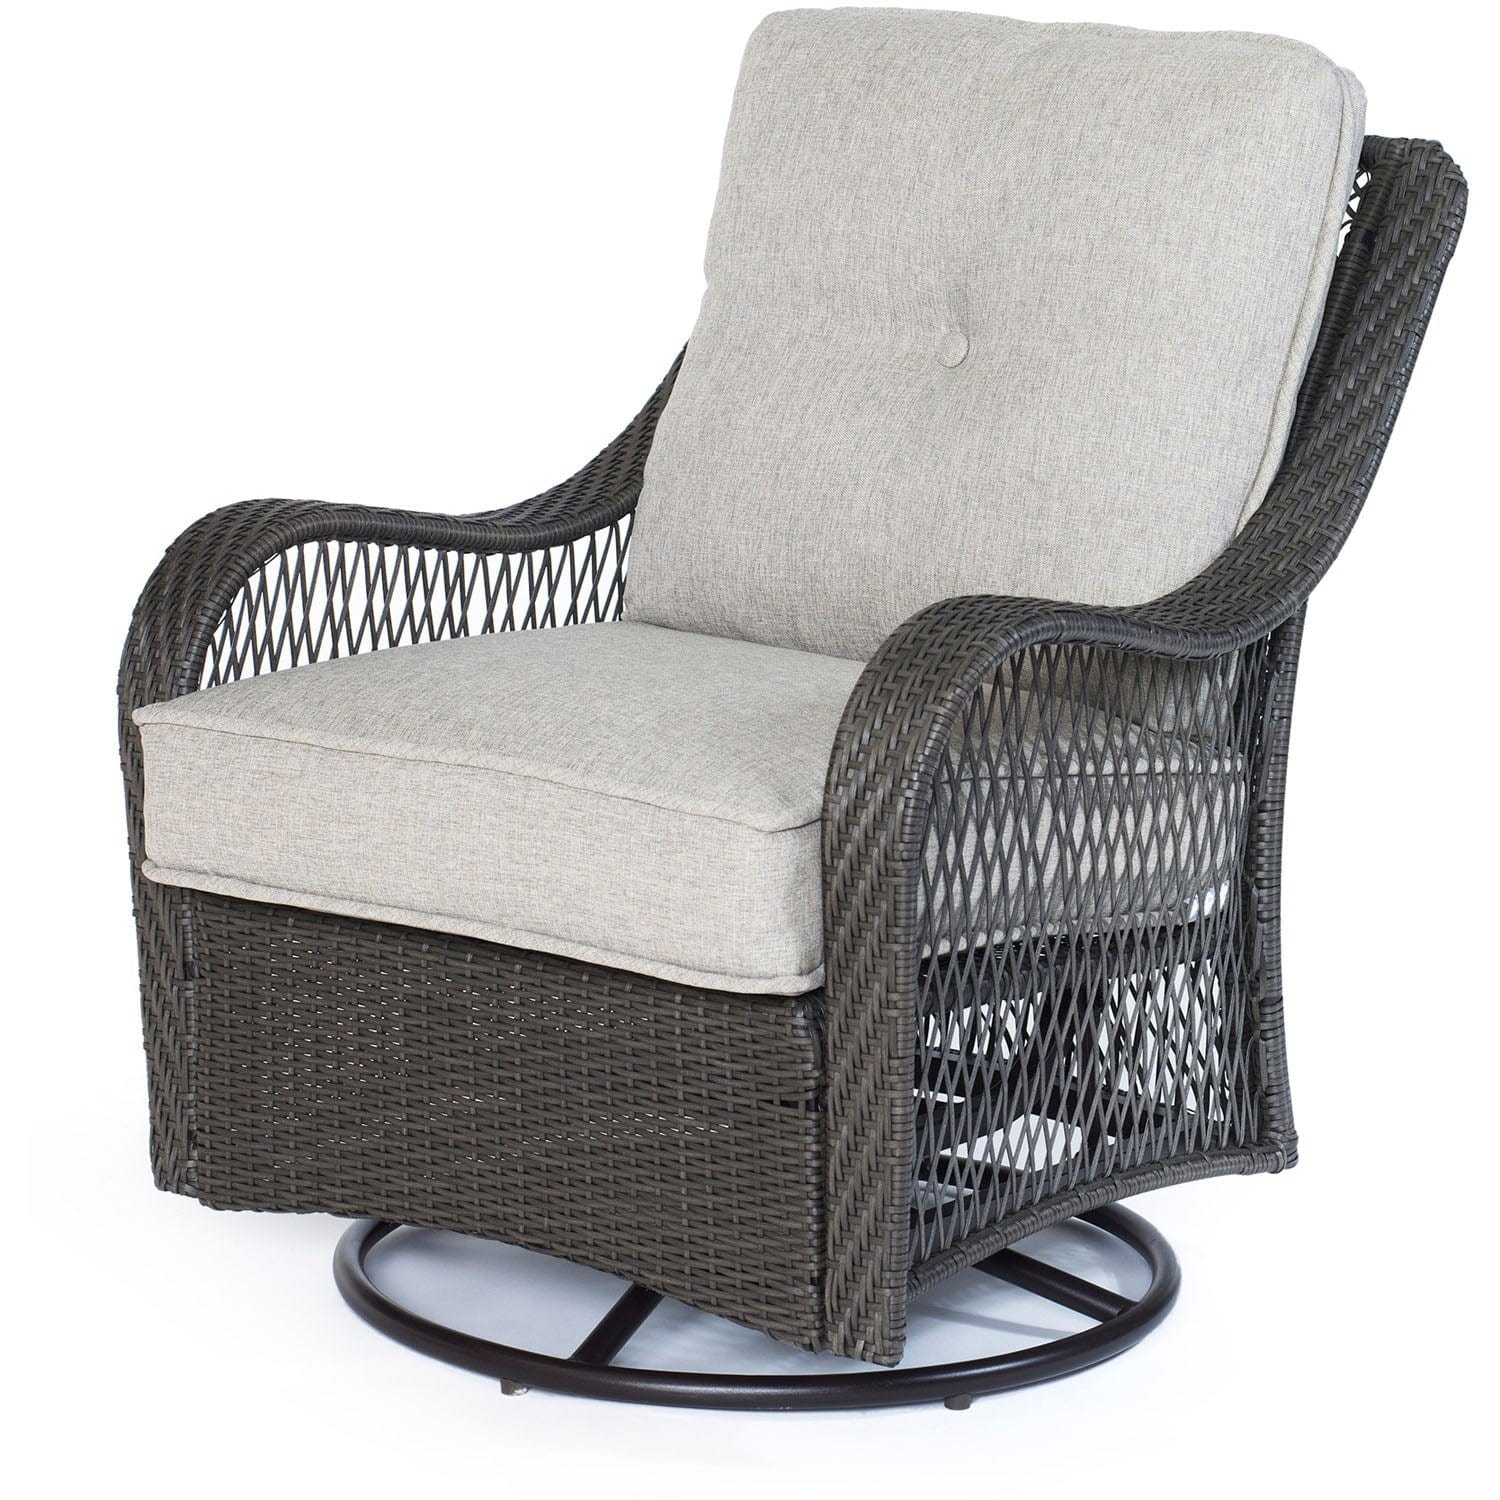 Hanover Conversation Set Hanover Orleans 3-Piece Swivel Gliding Chat Set in Heather Gray with Gray Weave